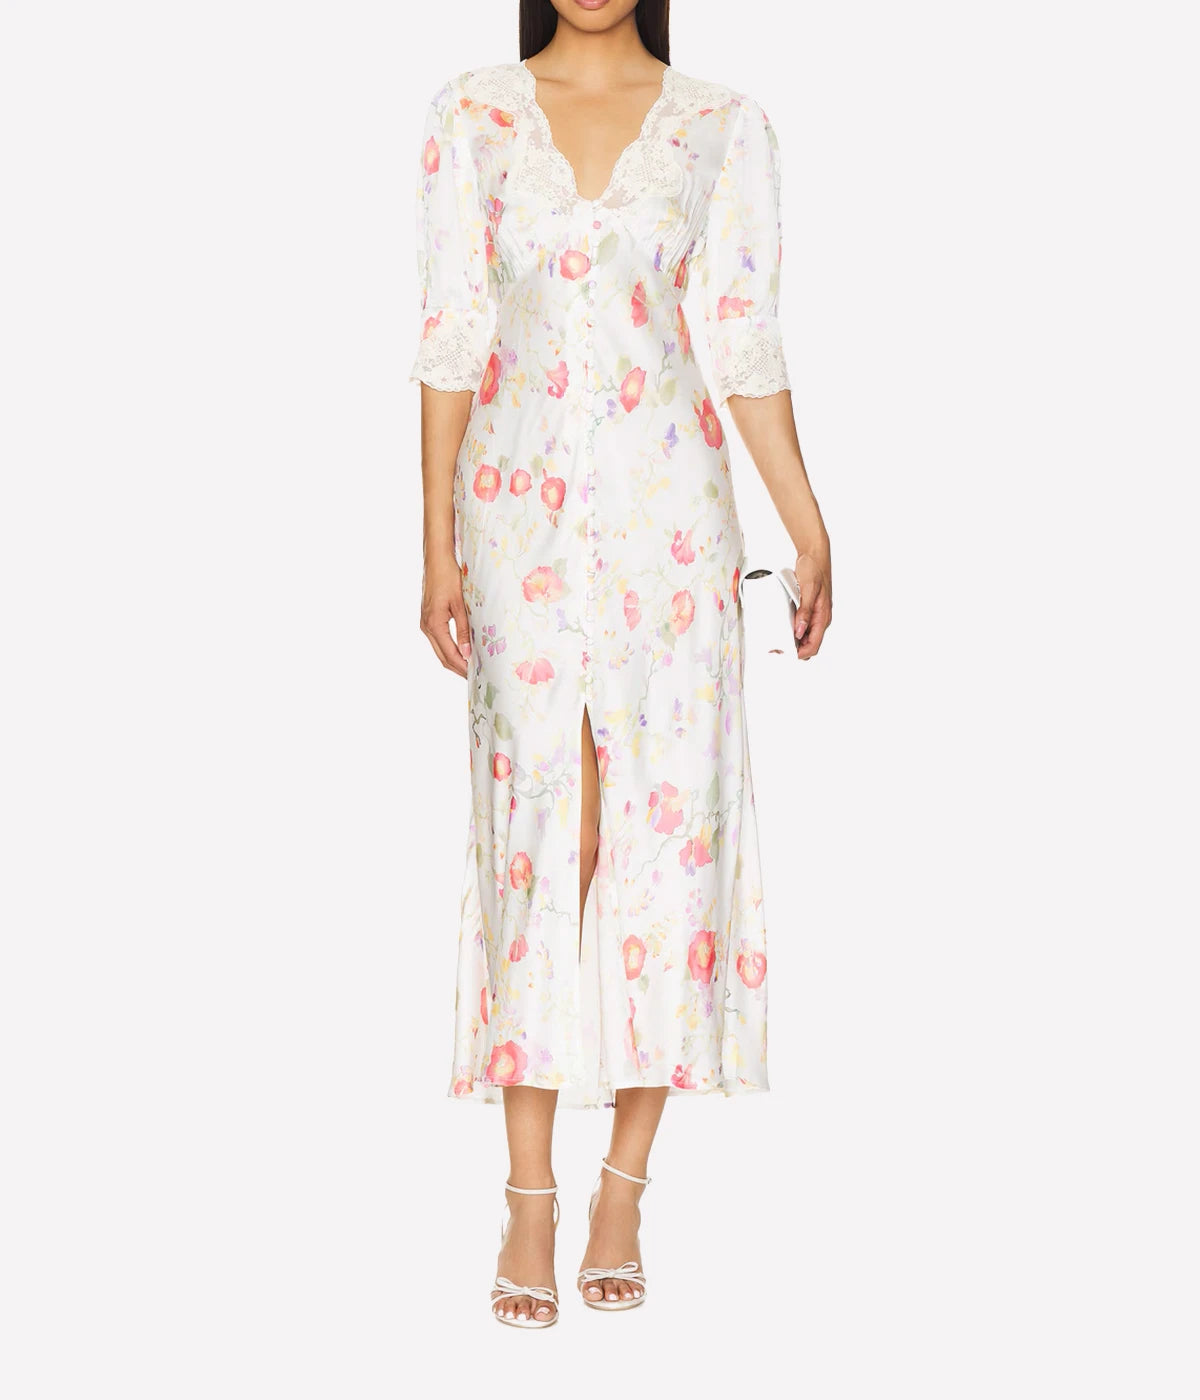 Simone Dress in Water Blossom